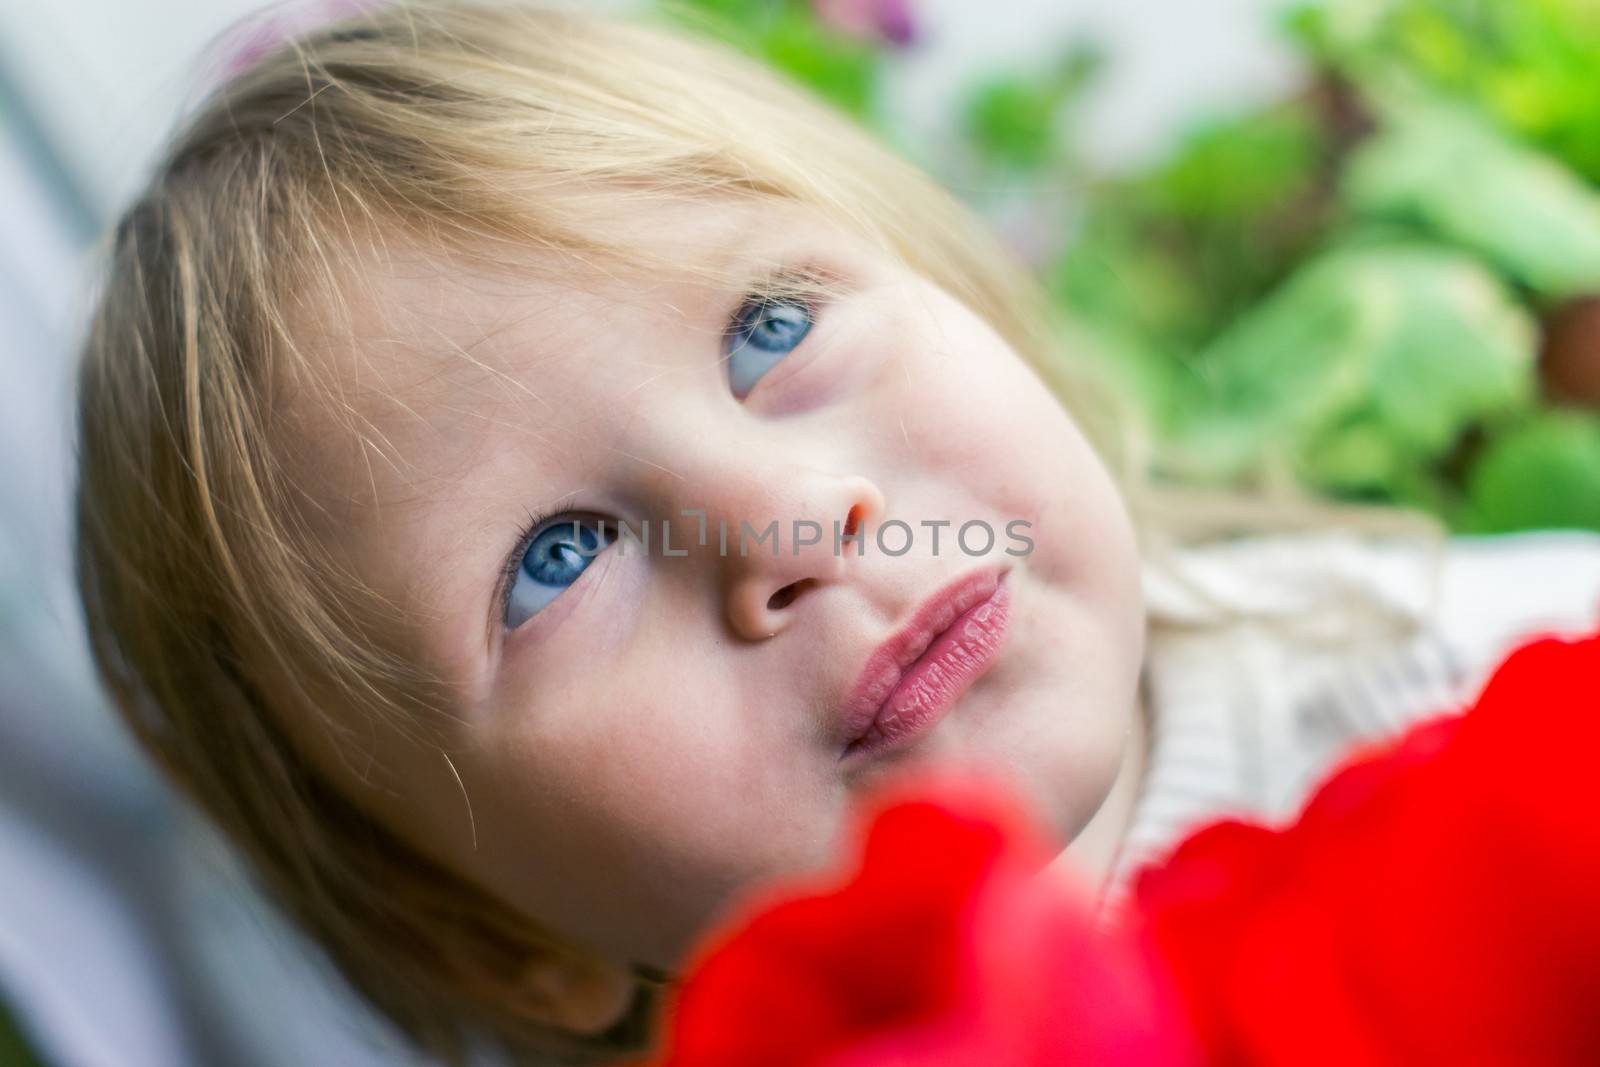 beautiful baby of red tulips by natochka